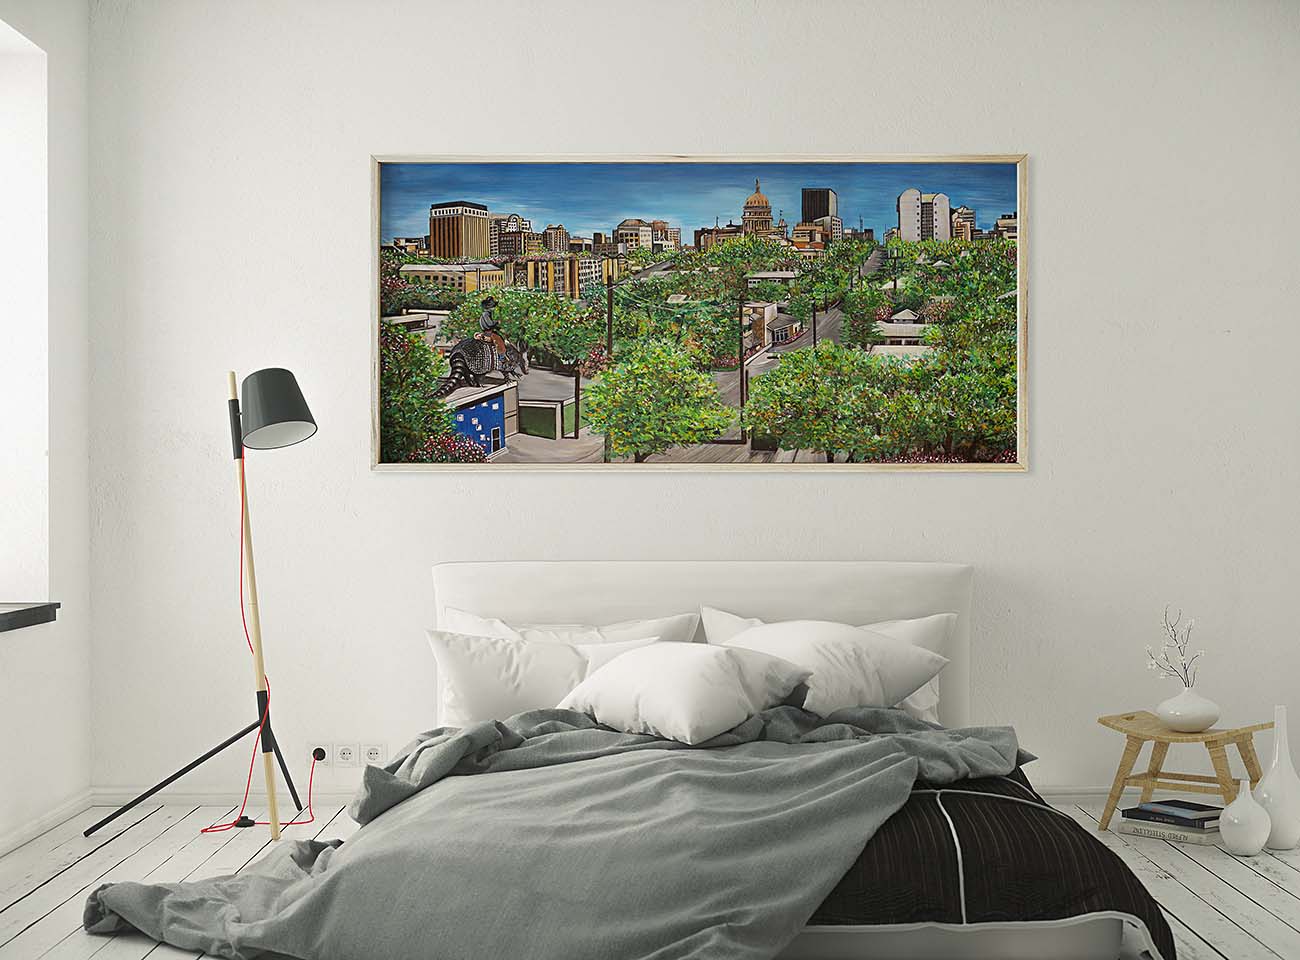 Austin Texas Castle Hill painting on a bedroom wall by Doug LaRue